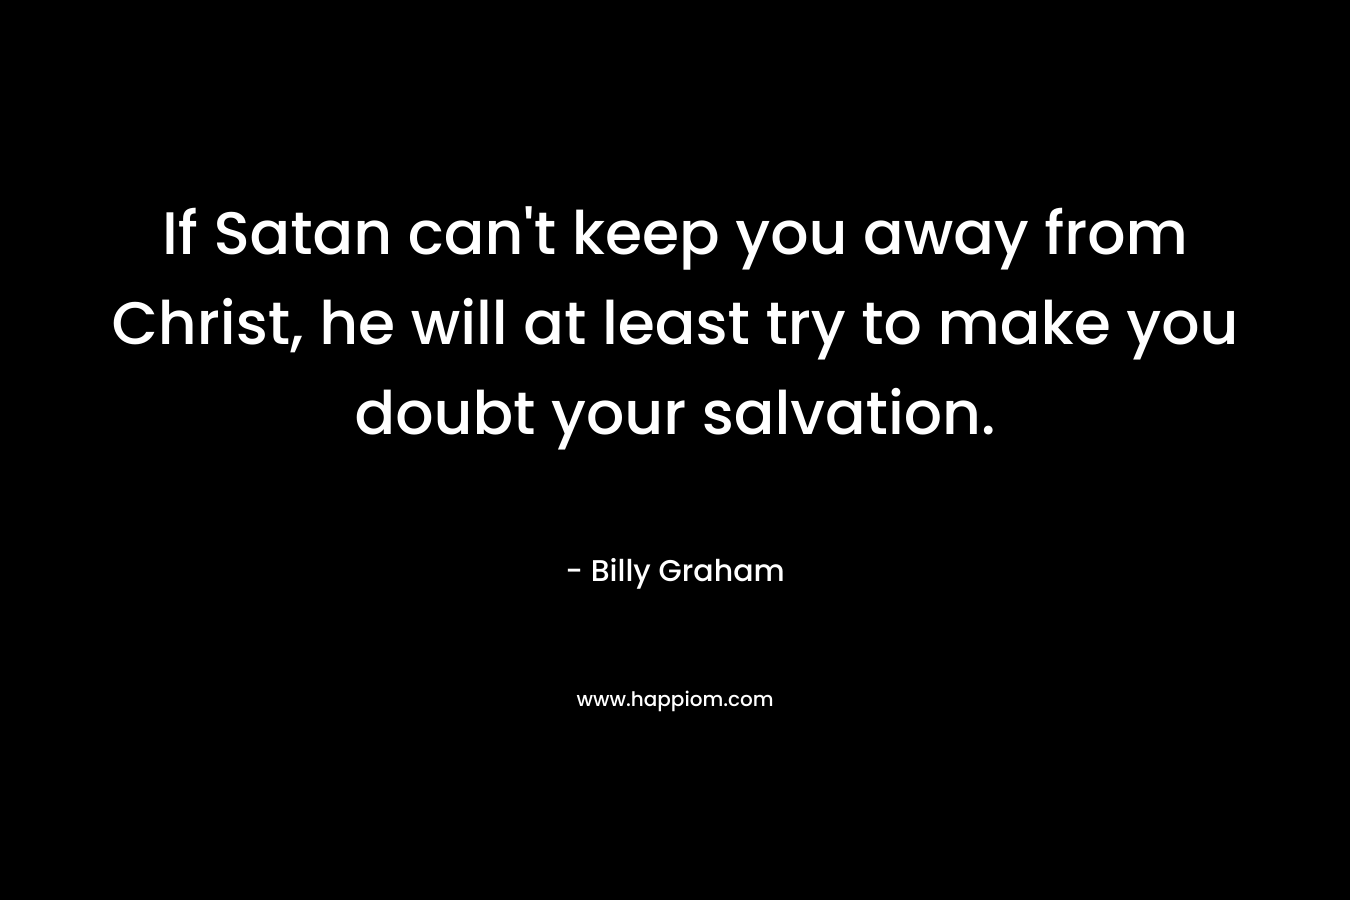 If Satan can't keep you away from Christ, he will at least try to make you doubt your salvation.